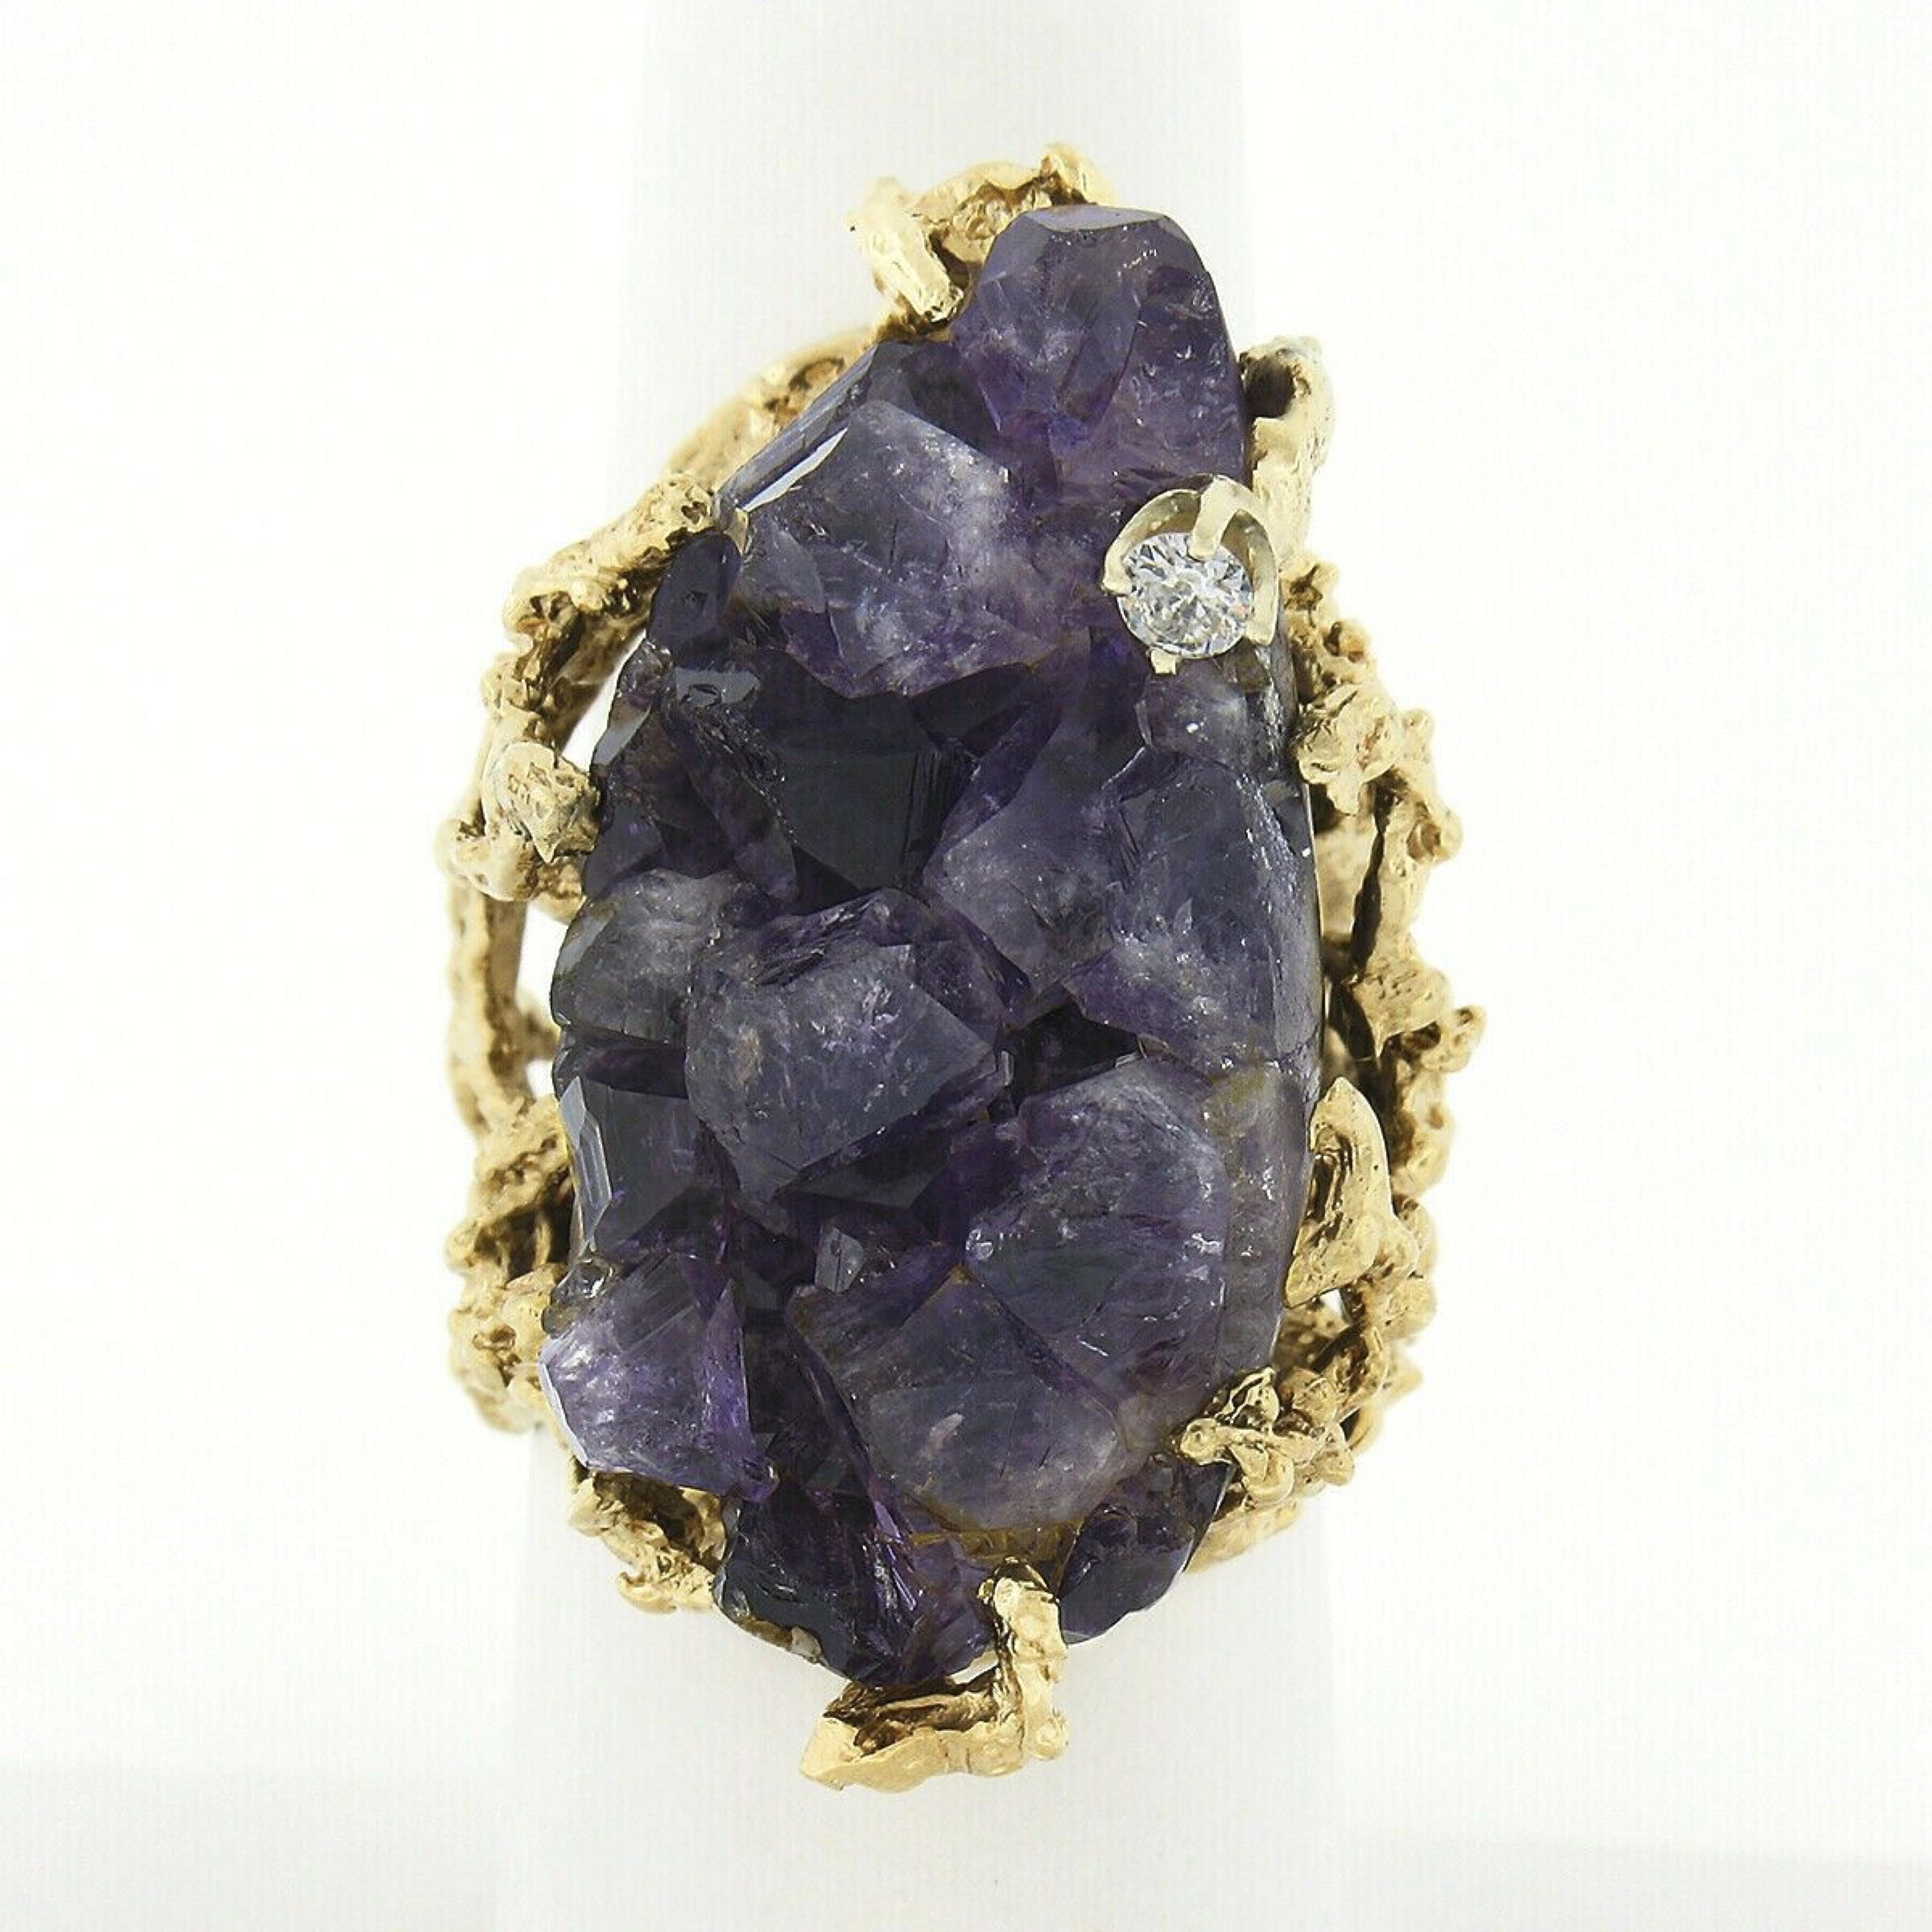 Vintage 14k Gold Large Rough Uncut Amethyst Crystal Diamond Coral Textured Ring